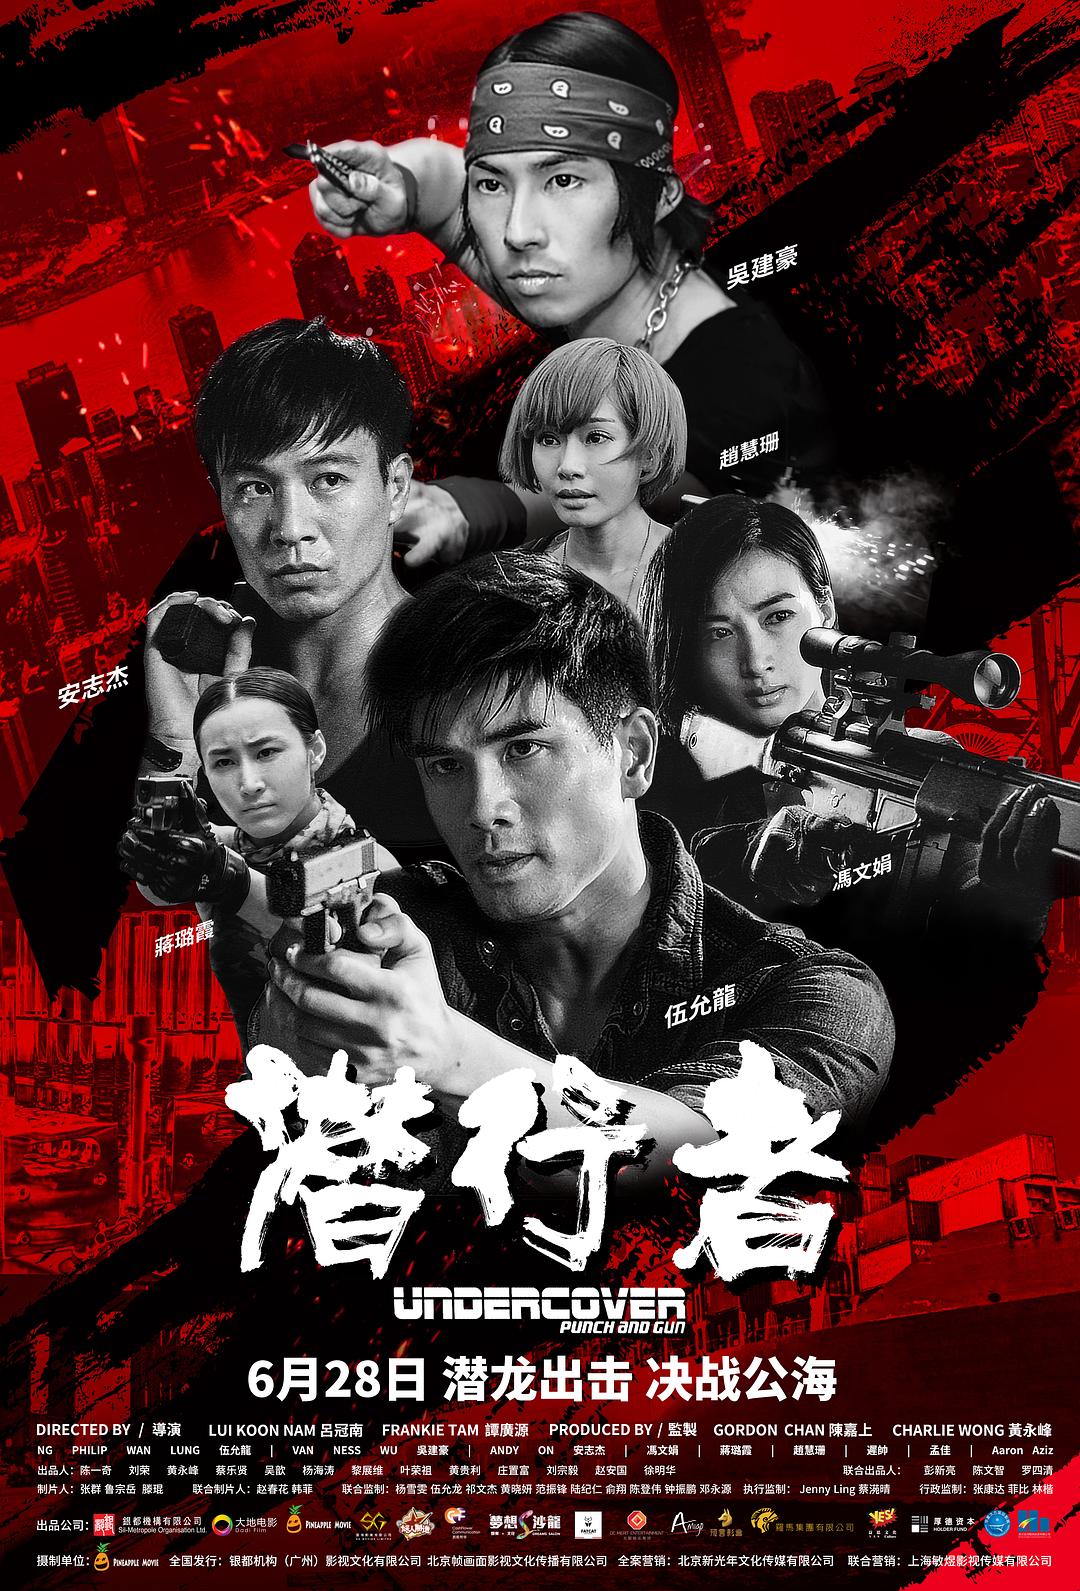 Ǳ Undercover.Punch.and.Gun.2019.CHINESE.1080p.BluRay.x264.DTS-iKiW 8.08GB-1.png